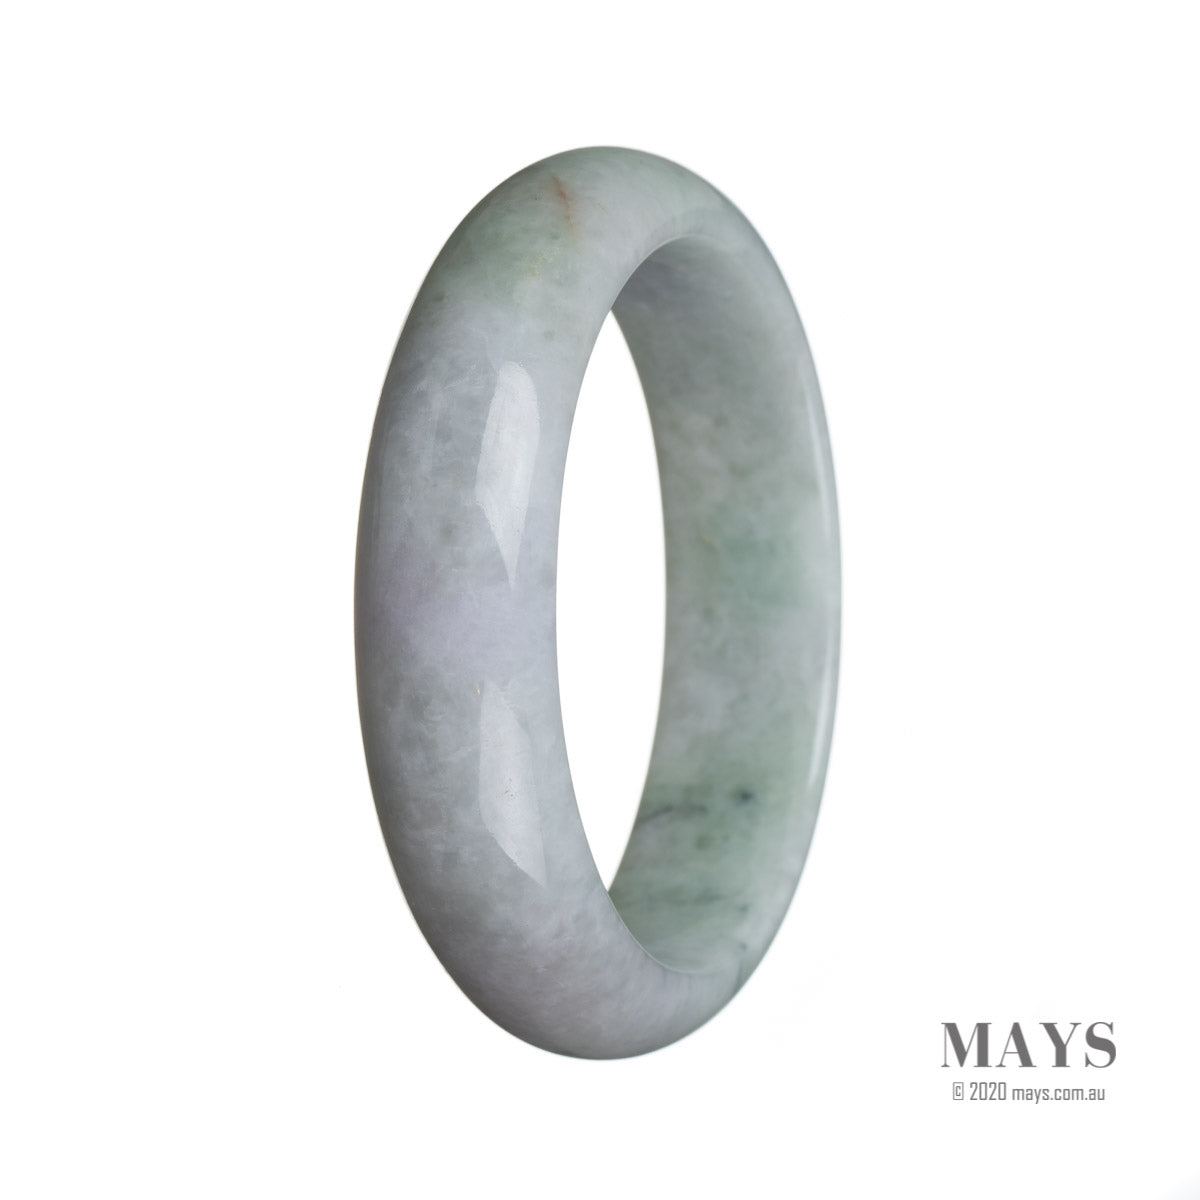 A light green Burma jade bangle with a half moon shape, measuring 59mm. Exquisite quality and craftsmanship by MAYS™.